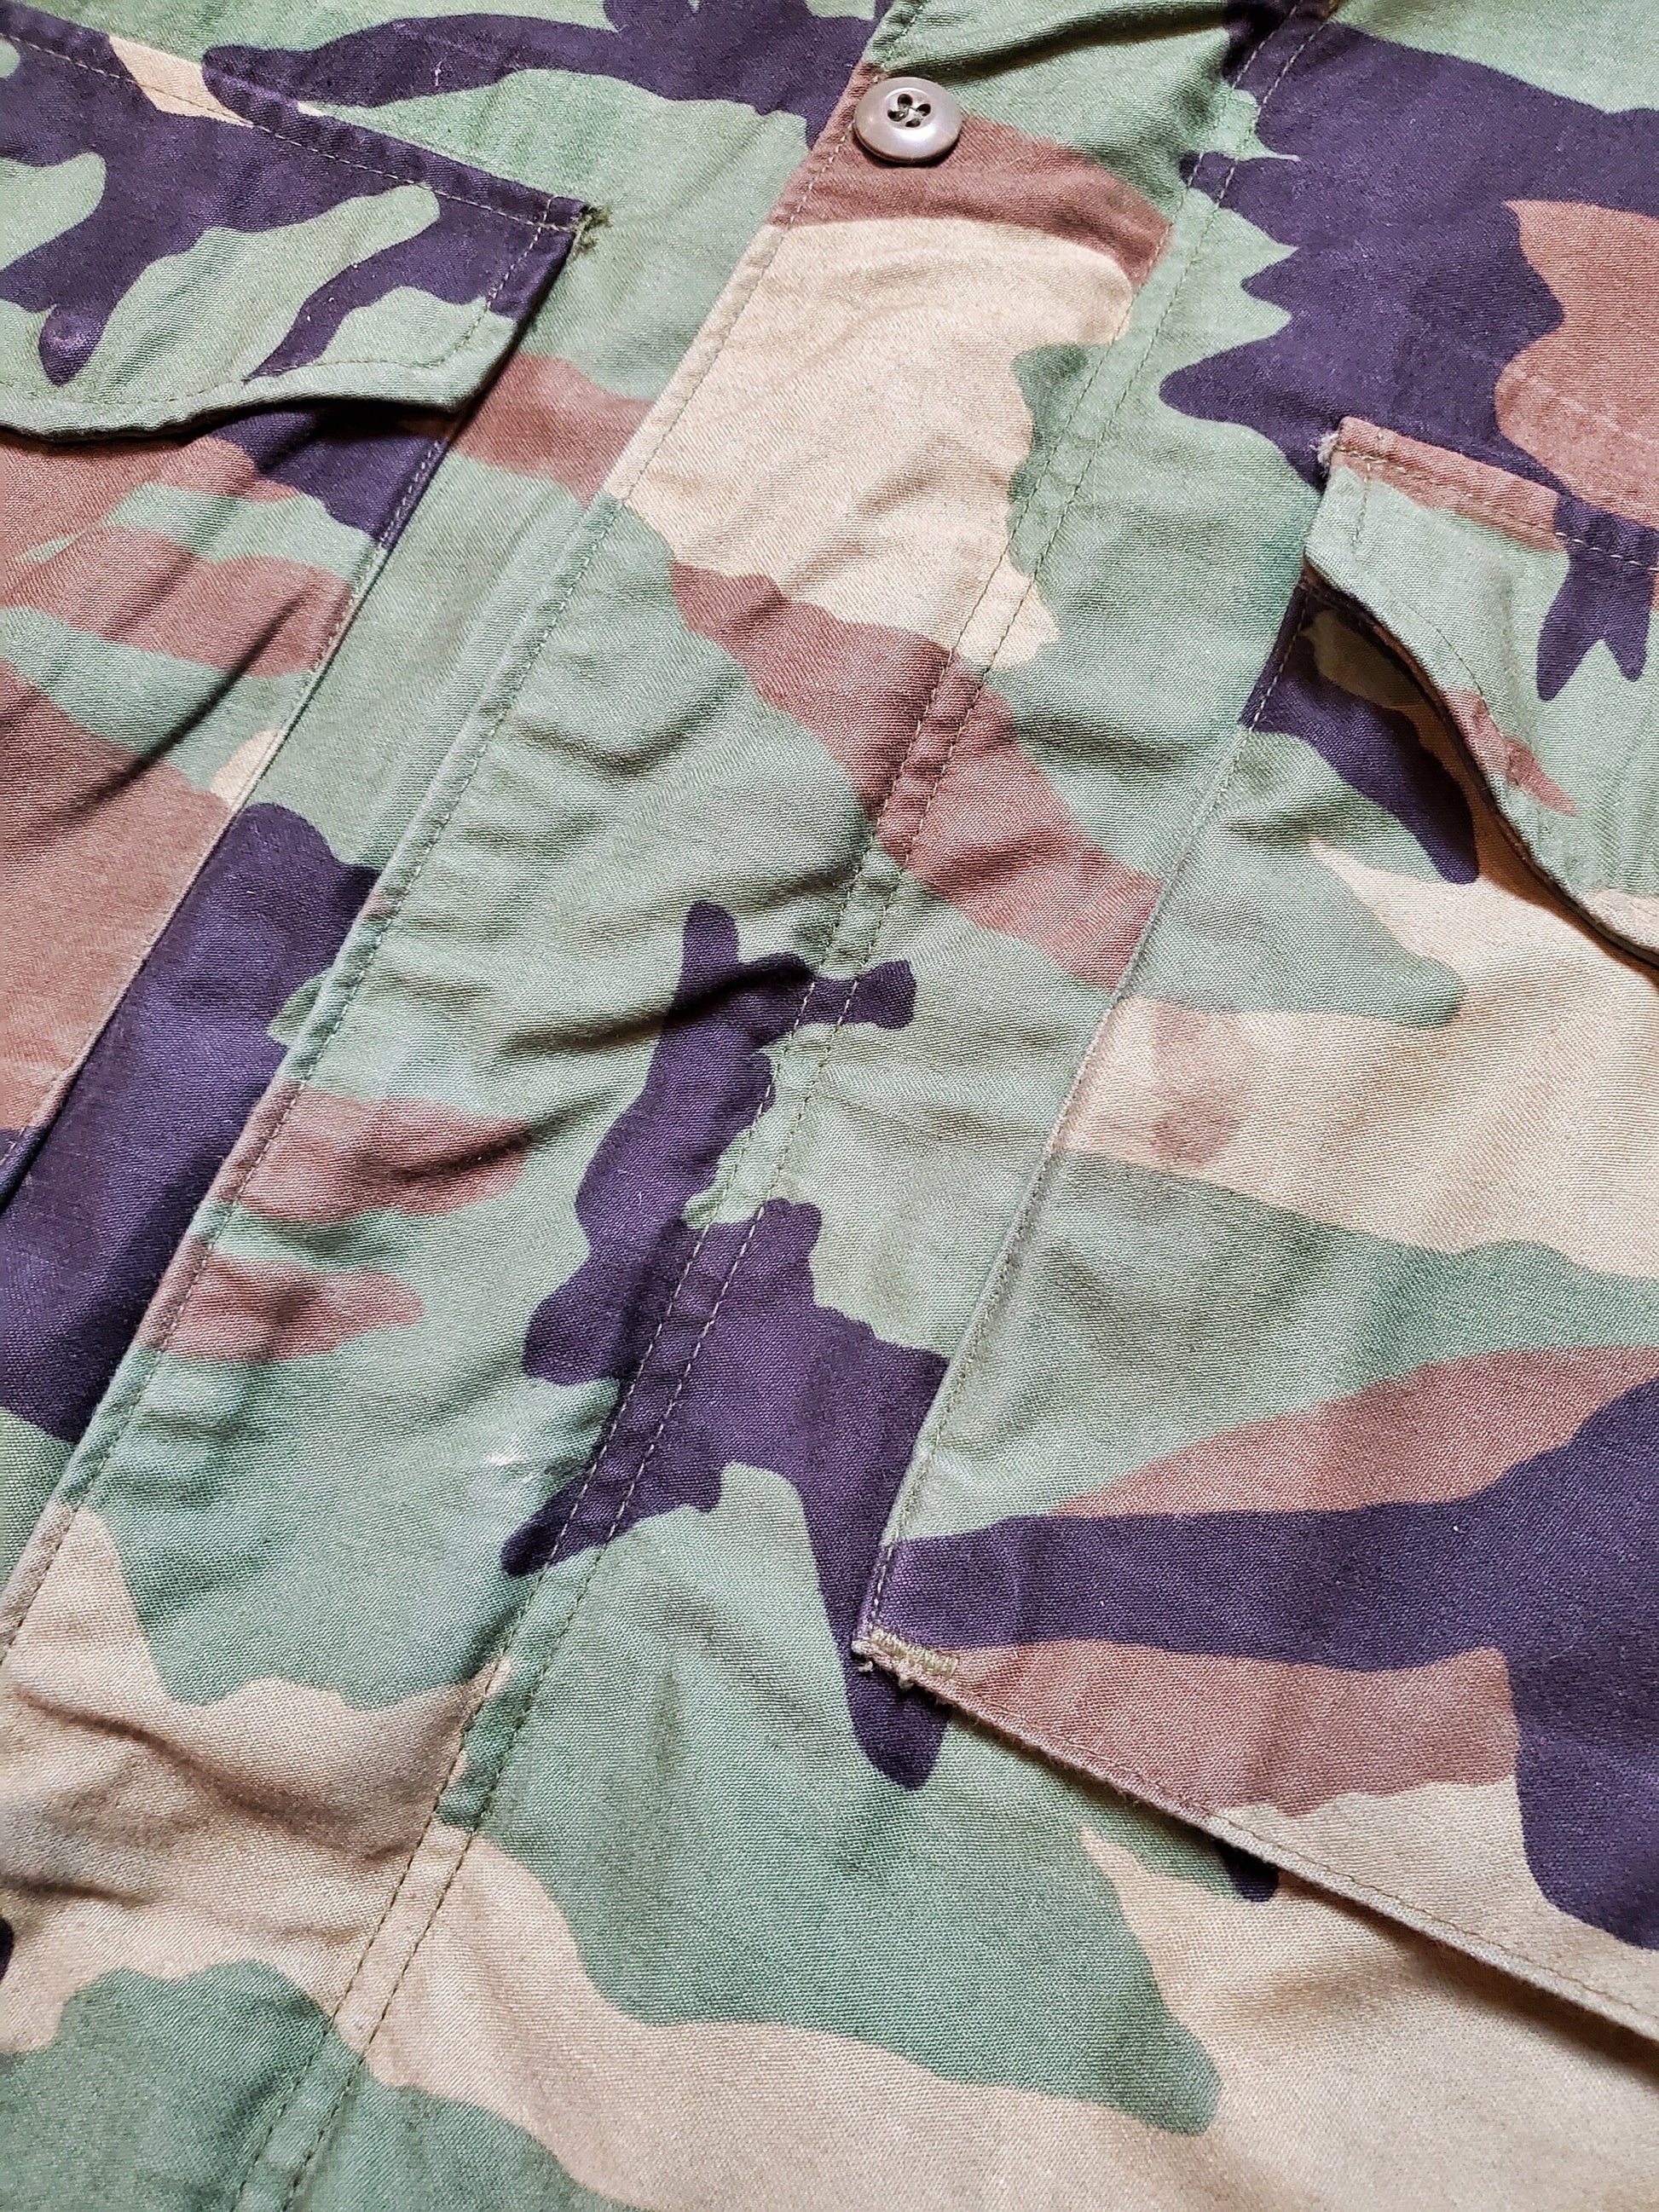 1980s Alpha Industries Woodland Camo M-65 Field Jacket with Removable Liner Made in USA Size M/L